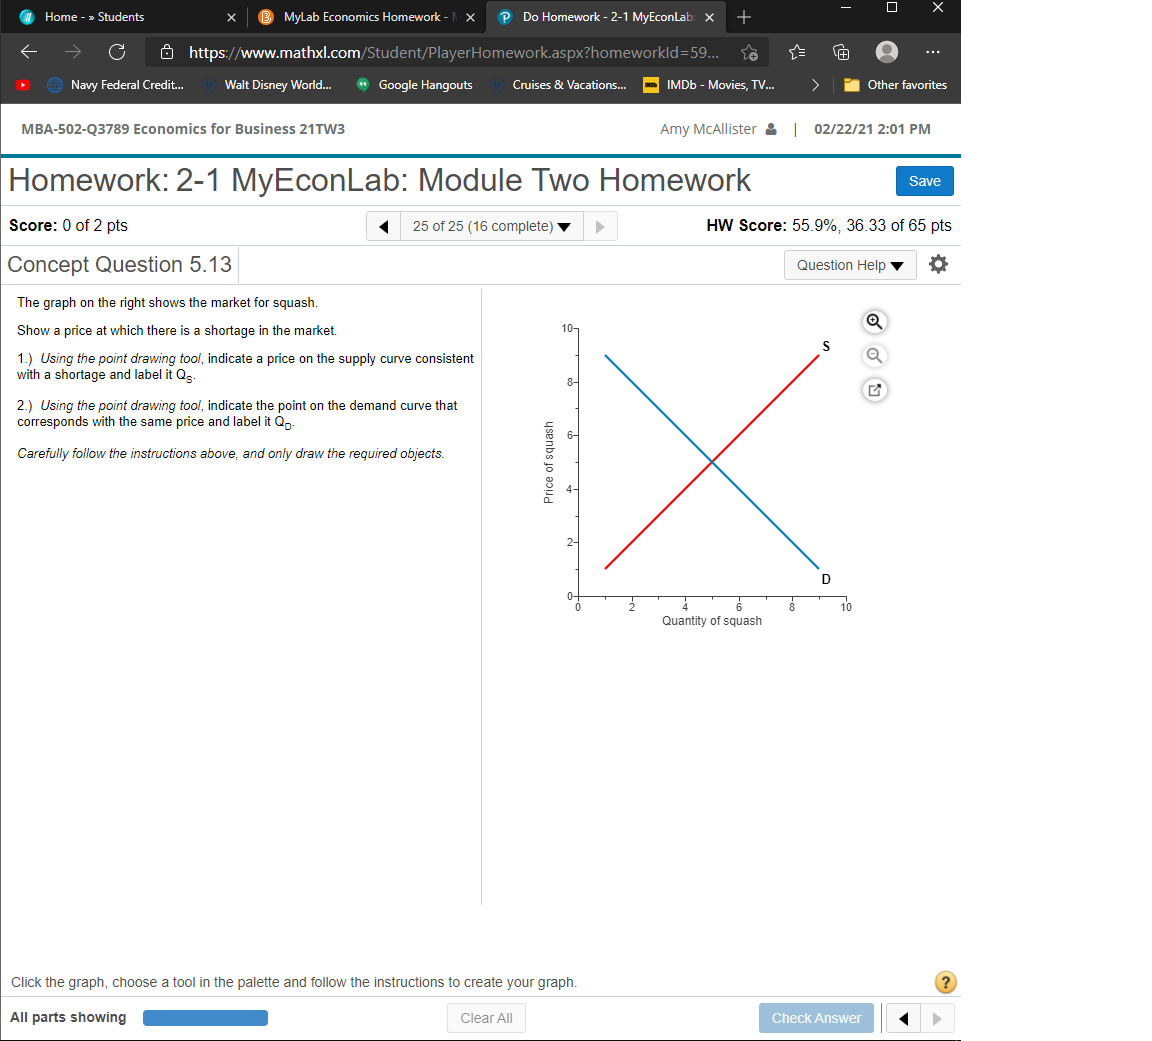 Home - » Students
MyLab Economics Homework -
P Do Homework - 2-1 MyEconLab: x
+
Ô https://www.mathxl.com/Student/PlayerHomework.aspx?homeworkld=59...
...
Navy Federal Credit.
Walt Disney World...
* Google Hangouts
>
Other favorites
Cruises & Vacations...
IMDB - Movies, TV.
MBA-502-Q3789 Economics for Business 21TW3
Amy McAllister & 02/22/21 2:01 PM
Homework: 2-1 MyEconLab: Module Two Homework
Save
Score: 0 of 2 pts
25 of 25 (16 complete)
HW Score: 55.9%, 36.33 of 65 pts
Concept Question 5.13
Question Help
The graph on the right shows the market for squash.
Show a price at which there is a shortage in the market.
10-
1.) Using the point drawing tool, indicate a price on the supply curve consistent
with a shortage and label it Qs.
2.) Using the point drawing tool, indicate the point on the demand curve that
corresponds with the same price and label it Qn:
Carefully follow the instructions above, and only draw the required objects.
D
10
Quantity of squash
Click the graph, choose a tool in the palette and follow the instructions to create your graph.
All parts showing
Clear All
Check Answer
Price of squash
